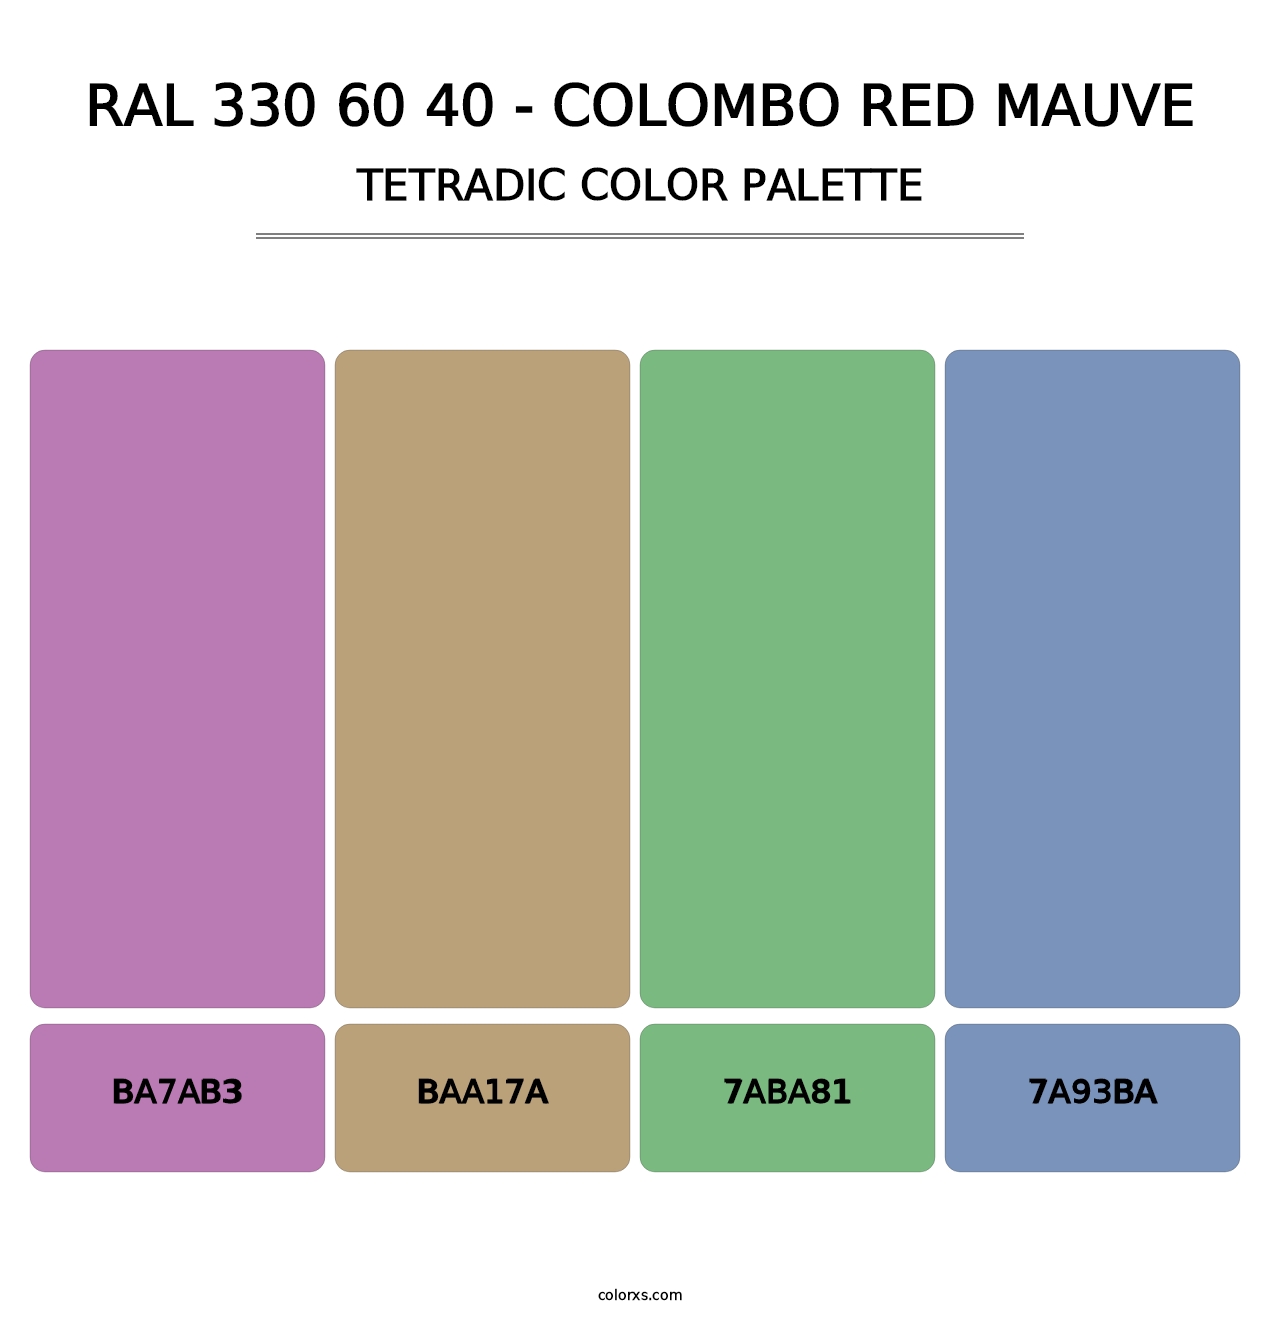 RAL 330 60 40 - Colombo Red Mauve - Tetradic Color Palette